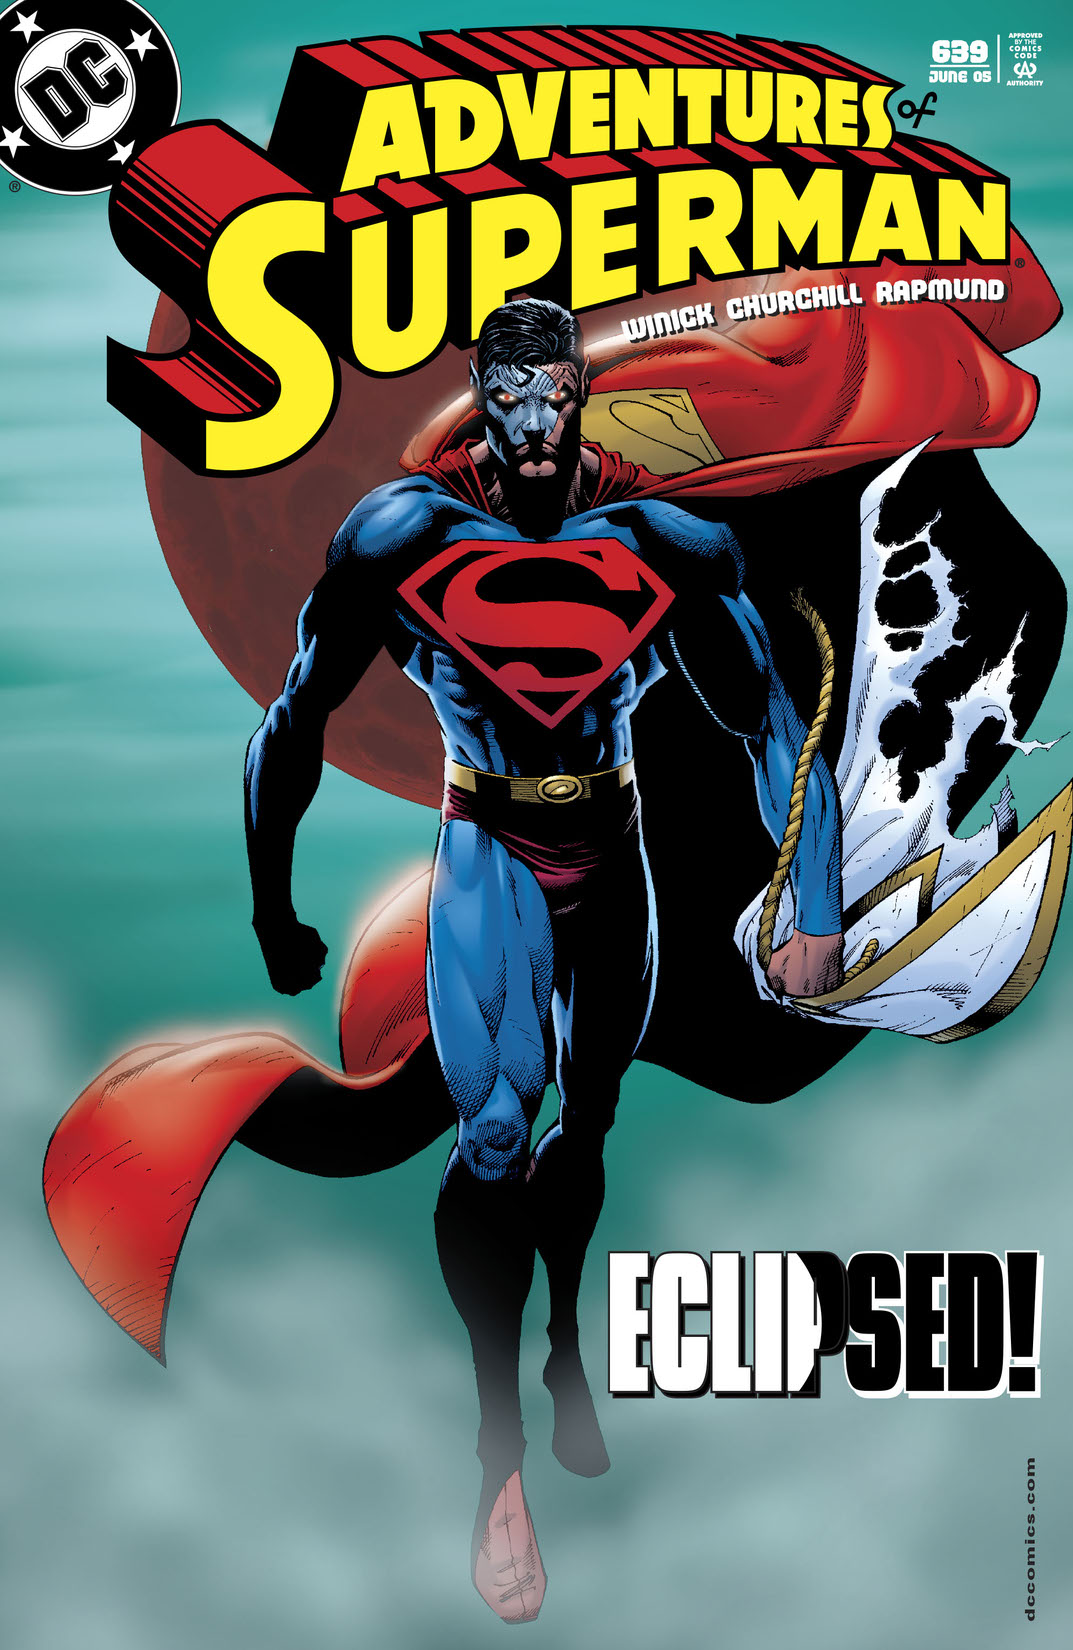 Adventures of Superman (1987-) #639 preview images